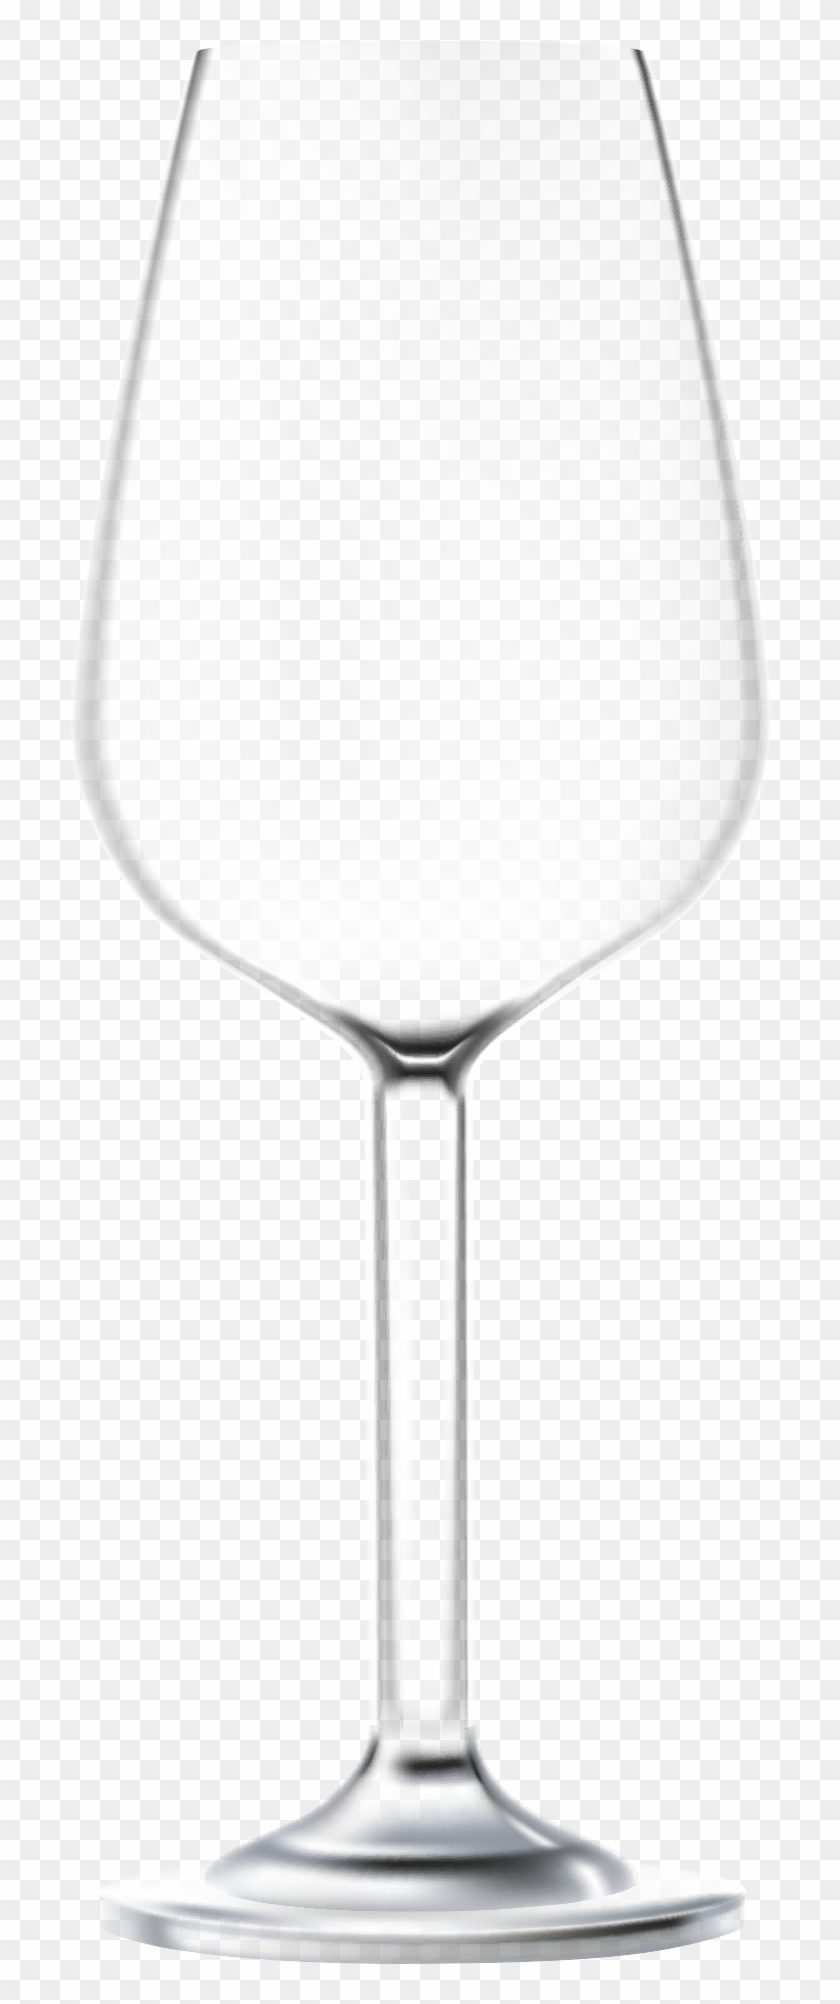 Download - Wine Glass Clipart #31405